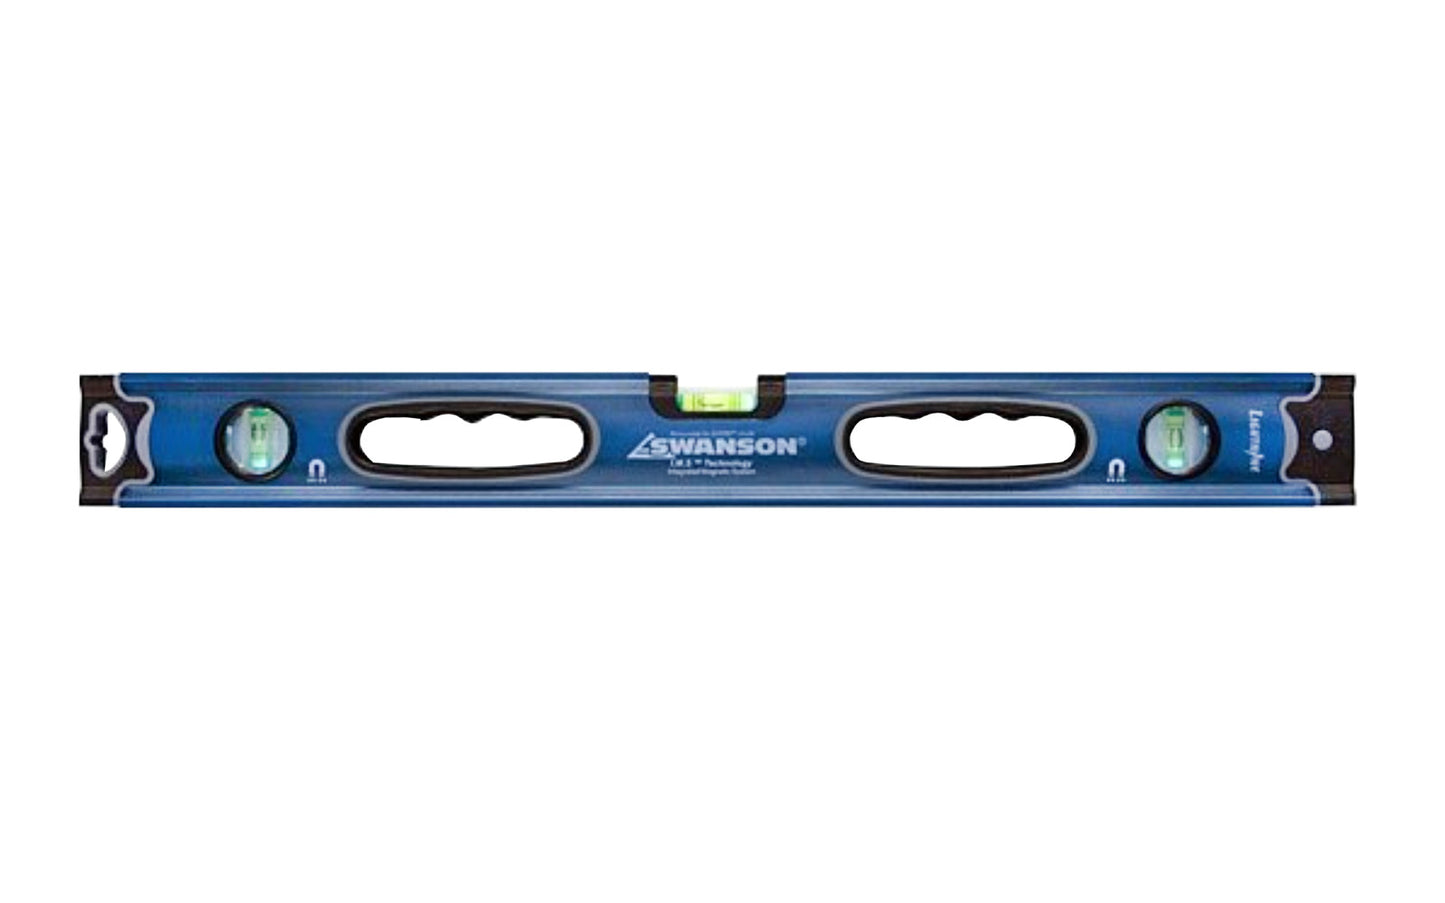 Swanson 24" Light Box Beam Level. Super Bright LEDs simultaneously light all 3 vials for low-light areas. V-grooved for working with round stock. Ruler measurements in centimeters & inches. High-grade aluminum frame. Swanson model No. BLL24M. 038987522413